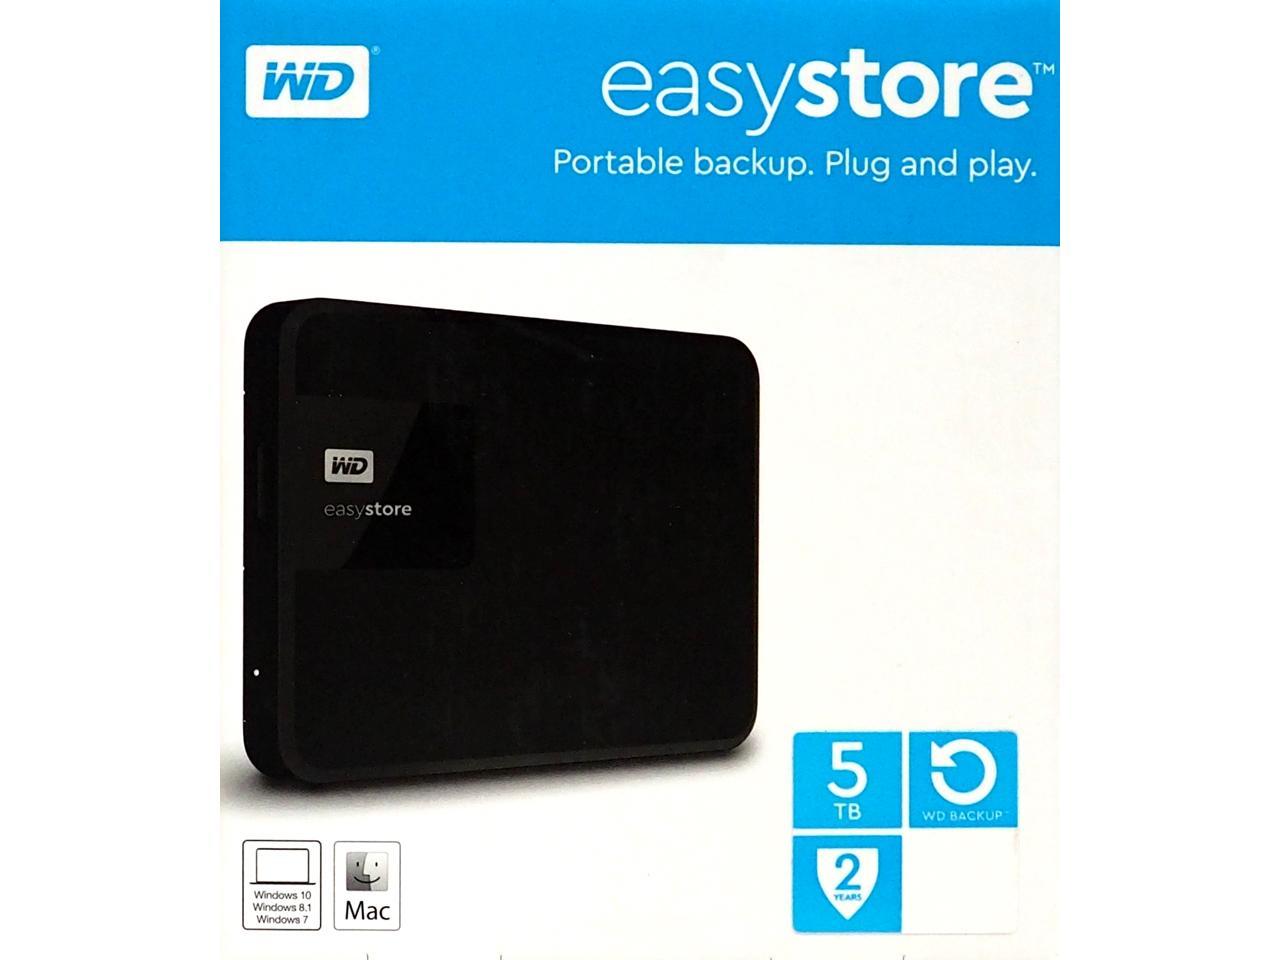 set up wd easystore for mac